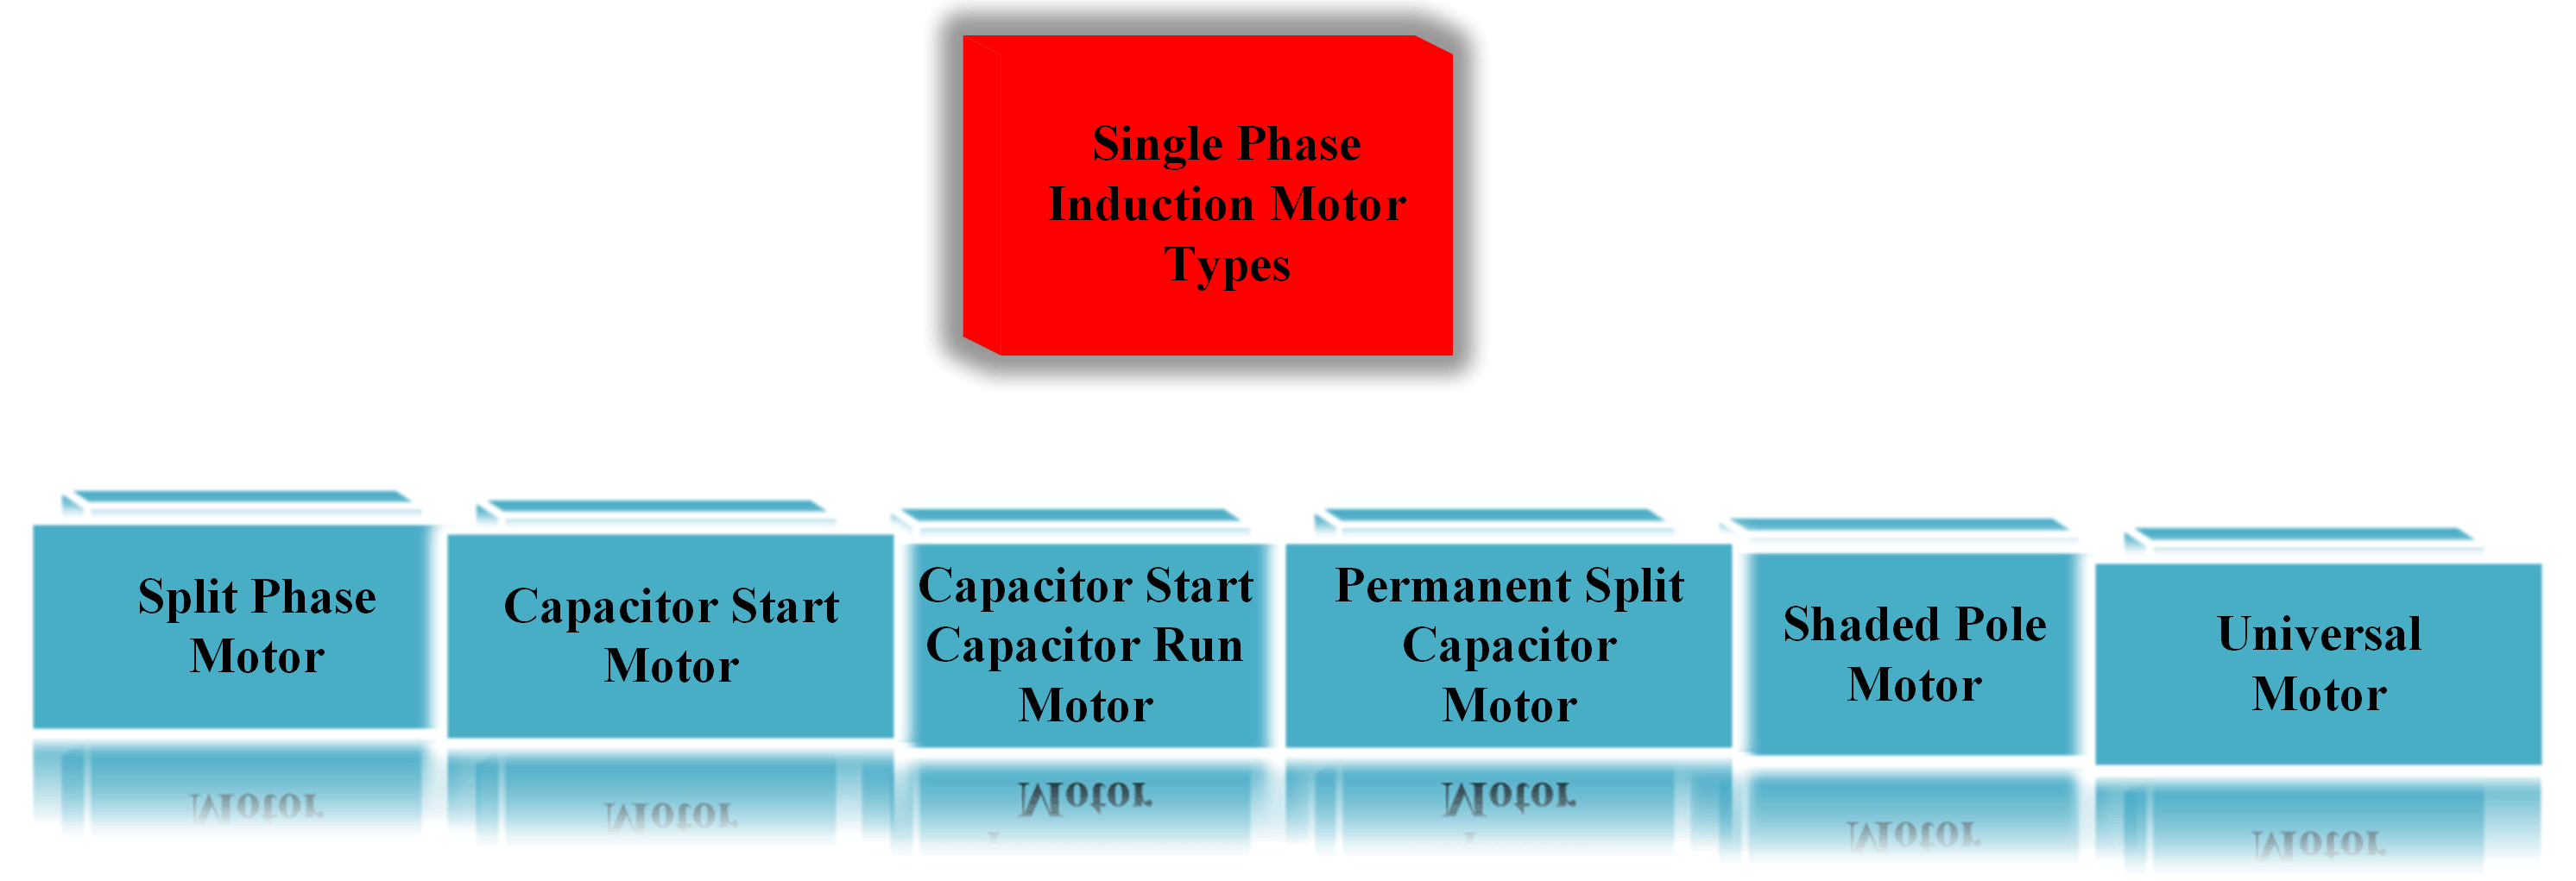 Single Phase Capacitor Start Motor Wiring Diagram from electricalacademia.com